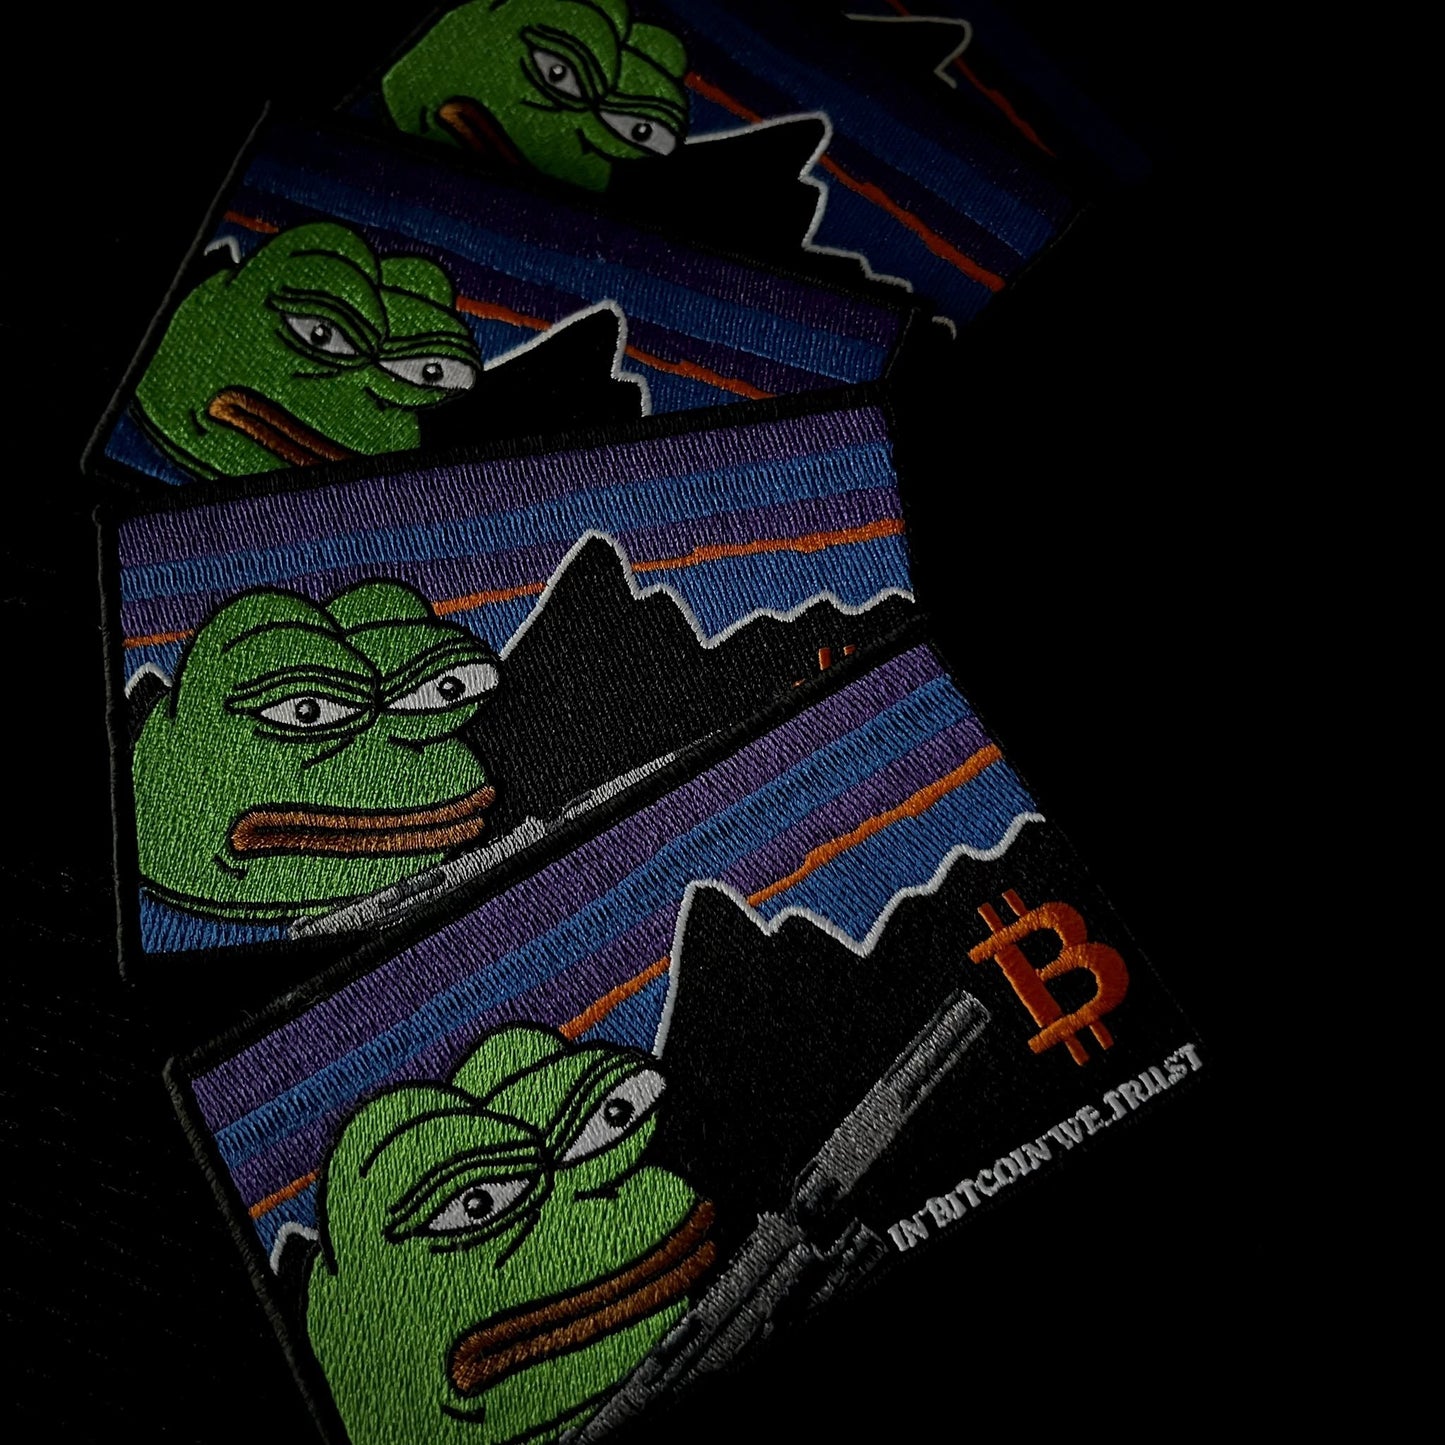 1HC "IN BITCOIN WE TRUST" PEPE PATCH